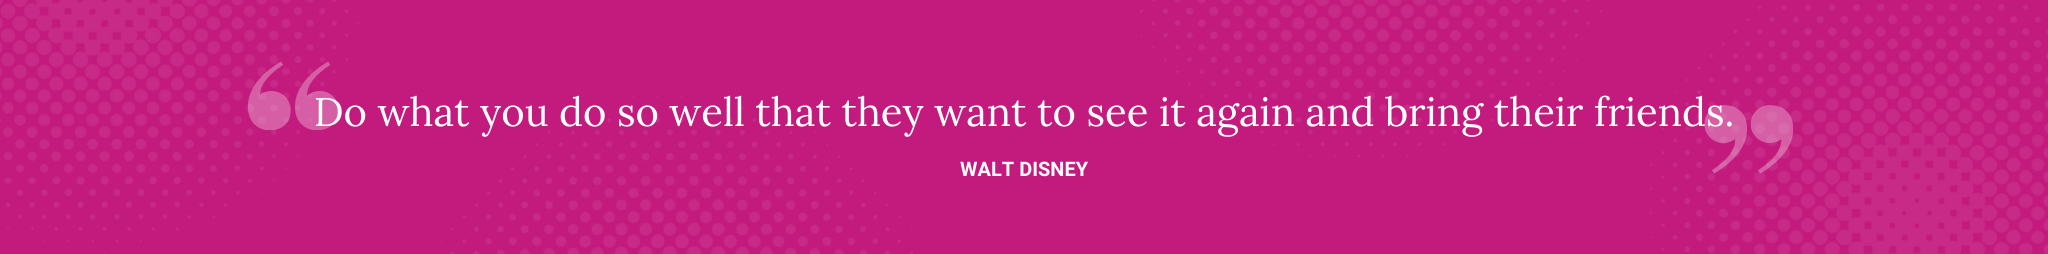 Walt Disney Quote for 50 Customer Service Stats Quotes and Facts - Brittany Hodak